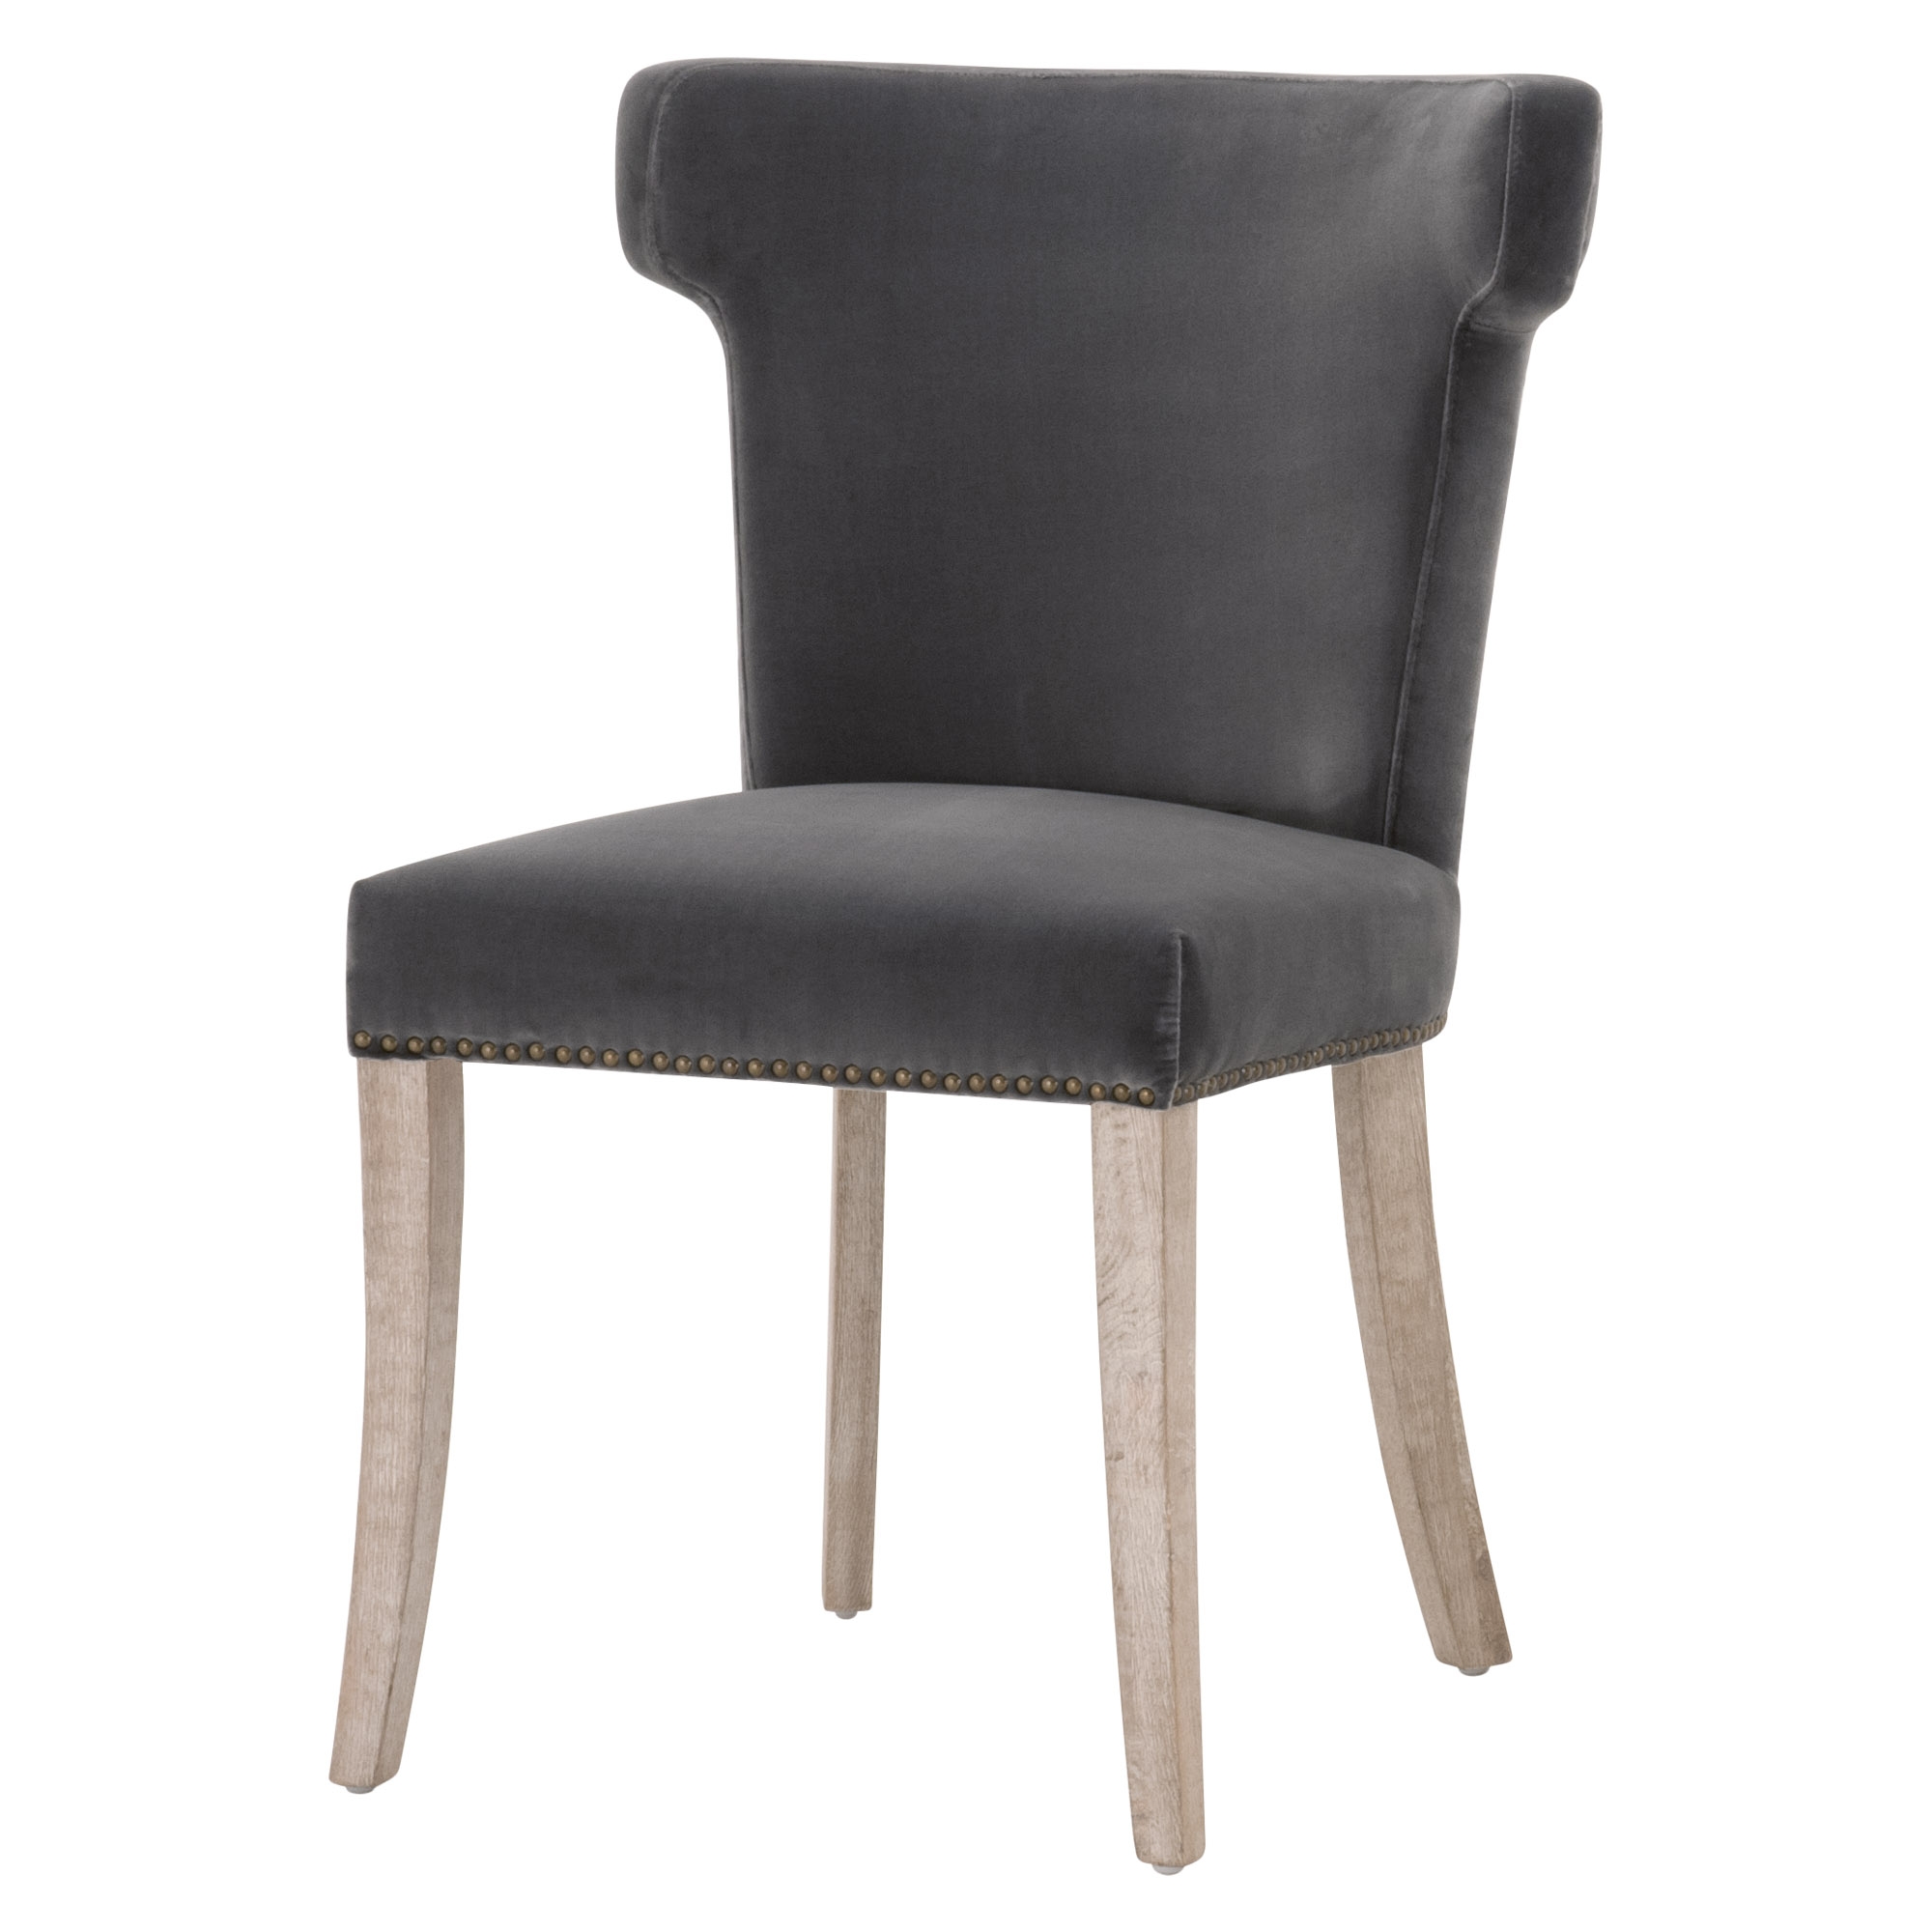 Celina Dining Chair - Image 1